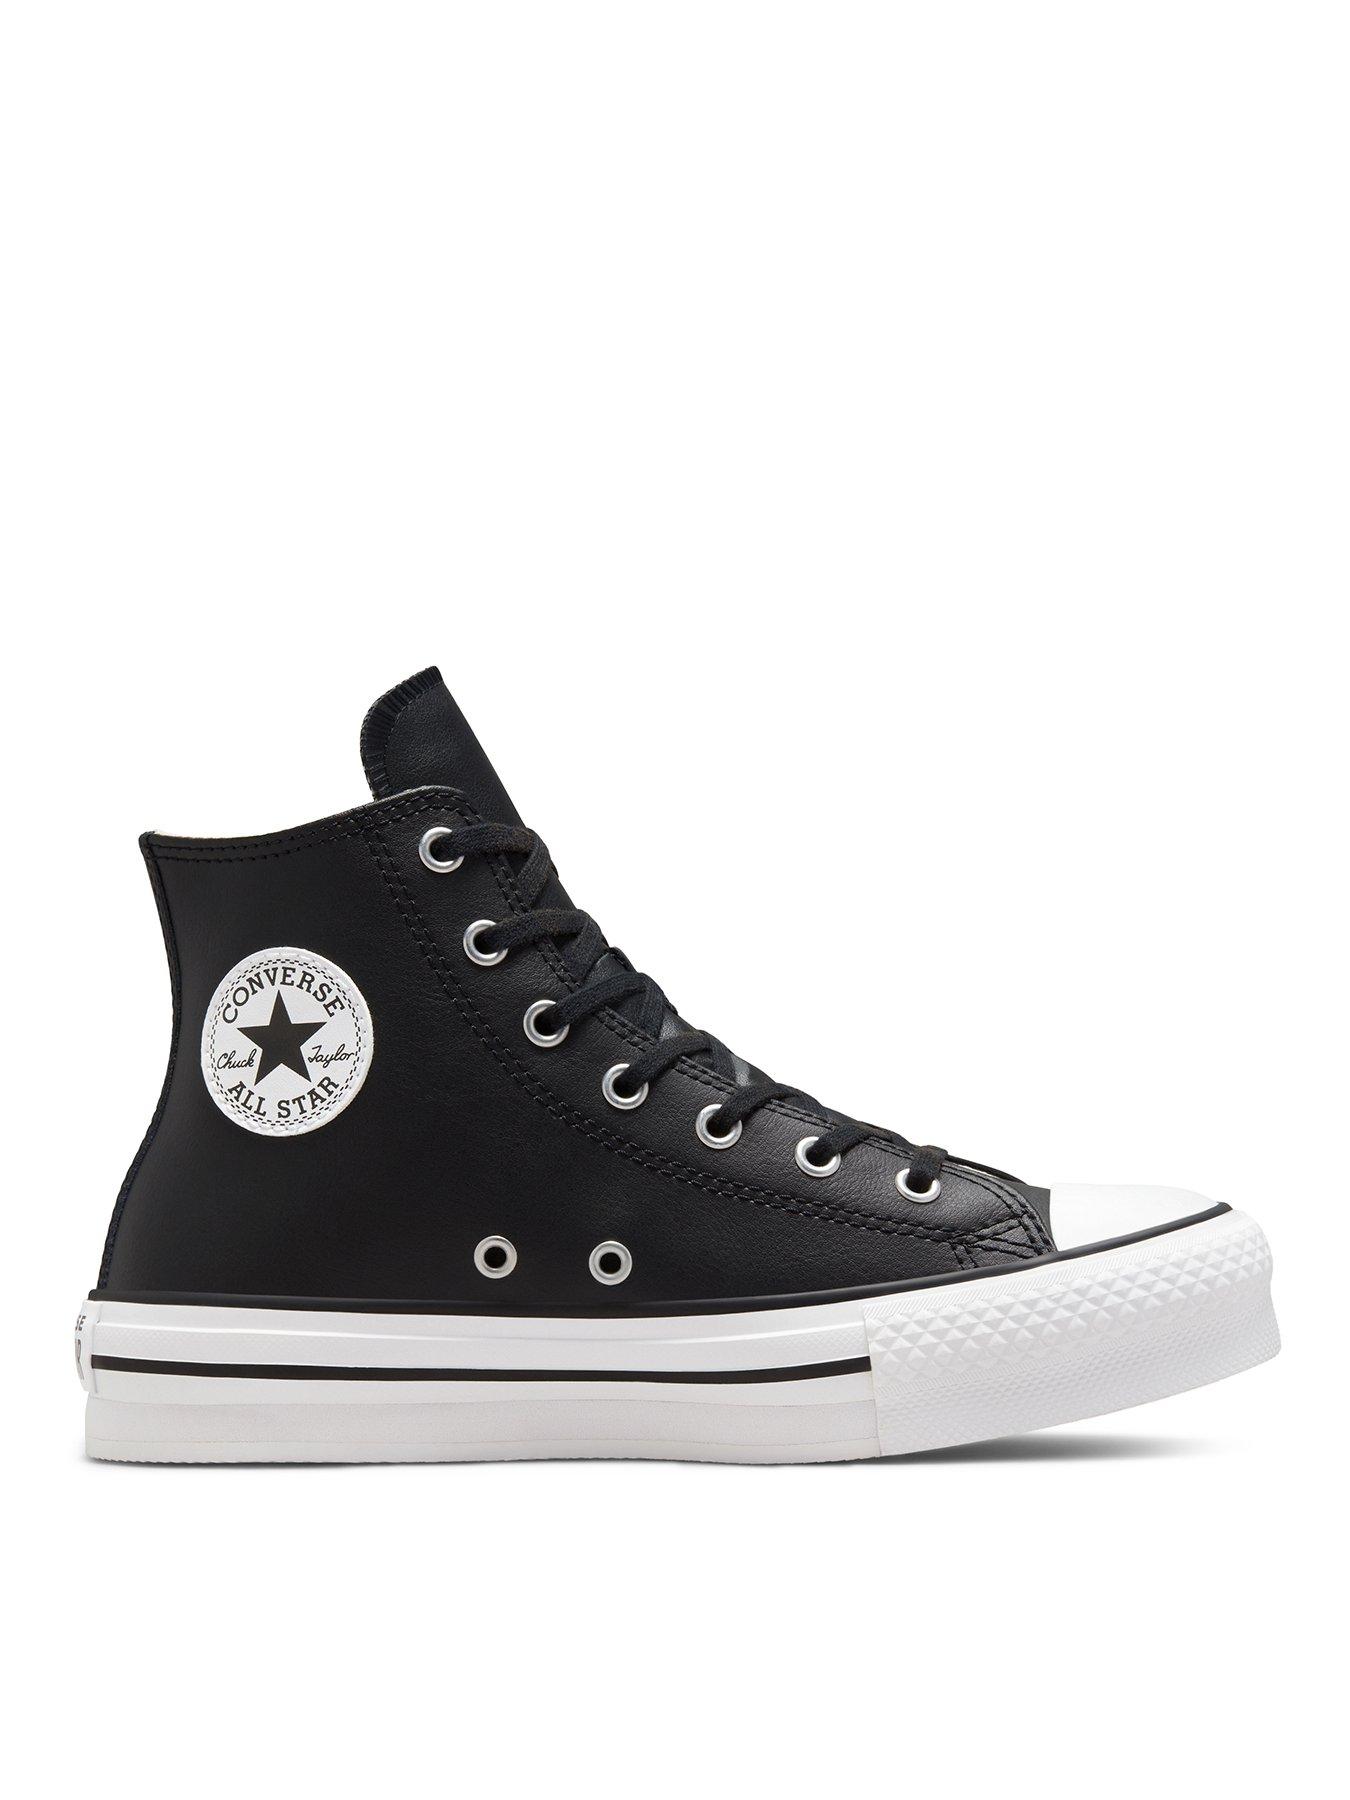 Converse Chuck Taylor All Star Eva Lift Leather Junior Top Trainers | very.co.uk